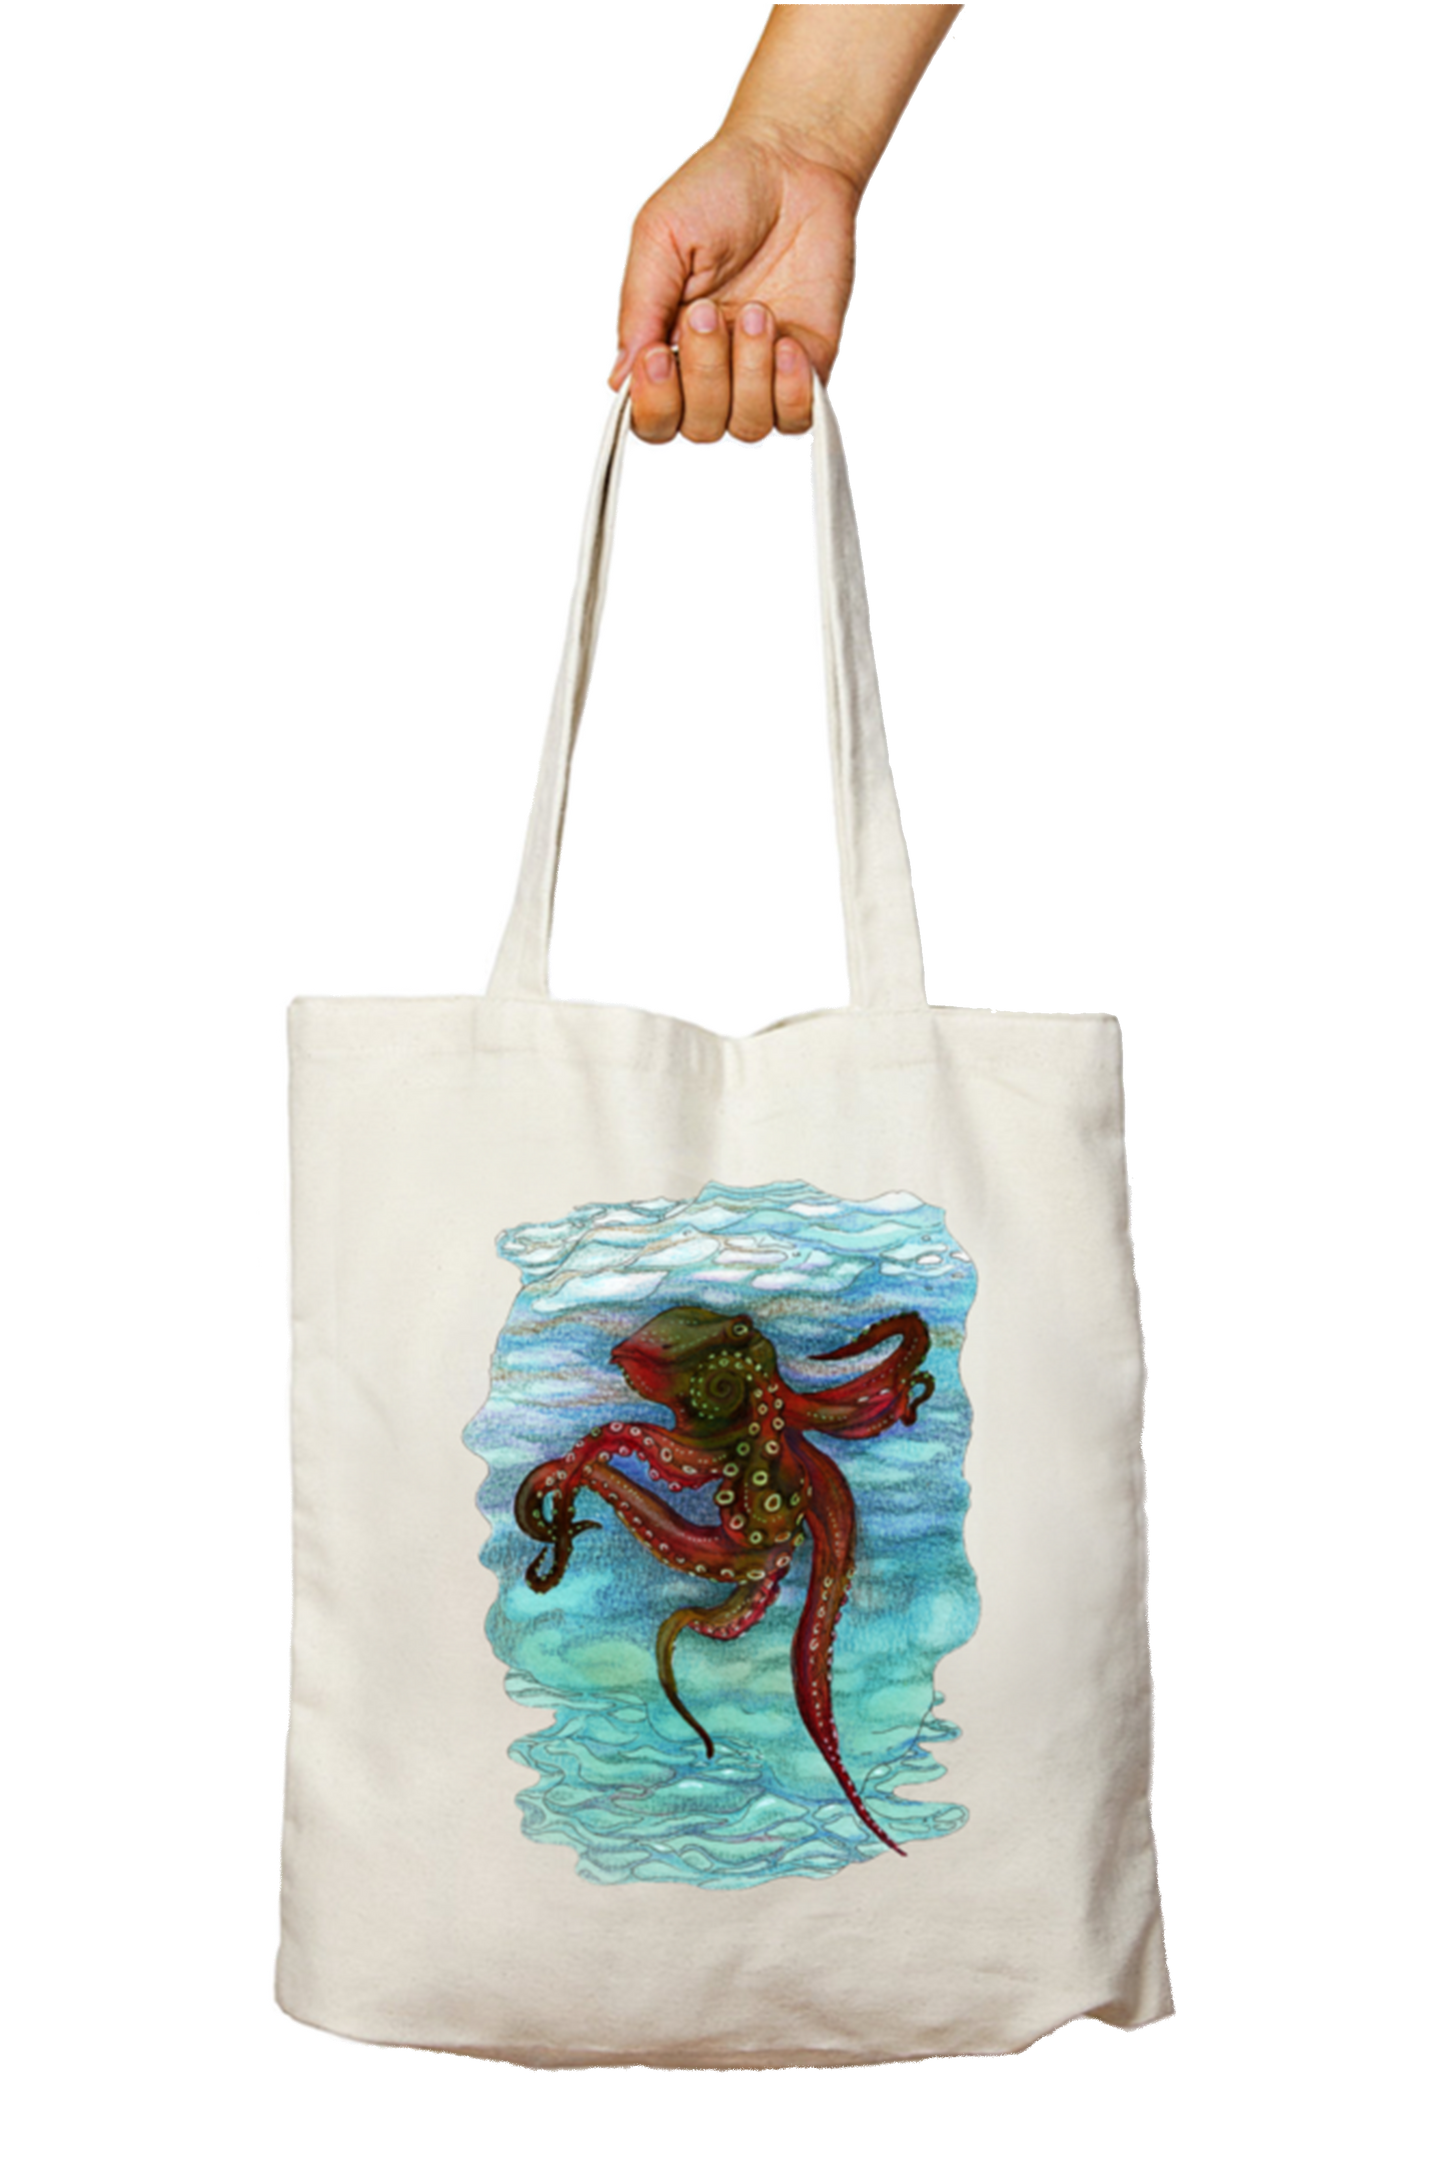 Octopus Tote Bag without Zipper